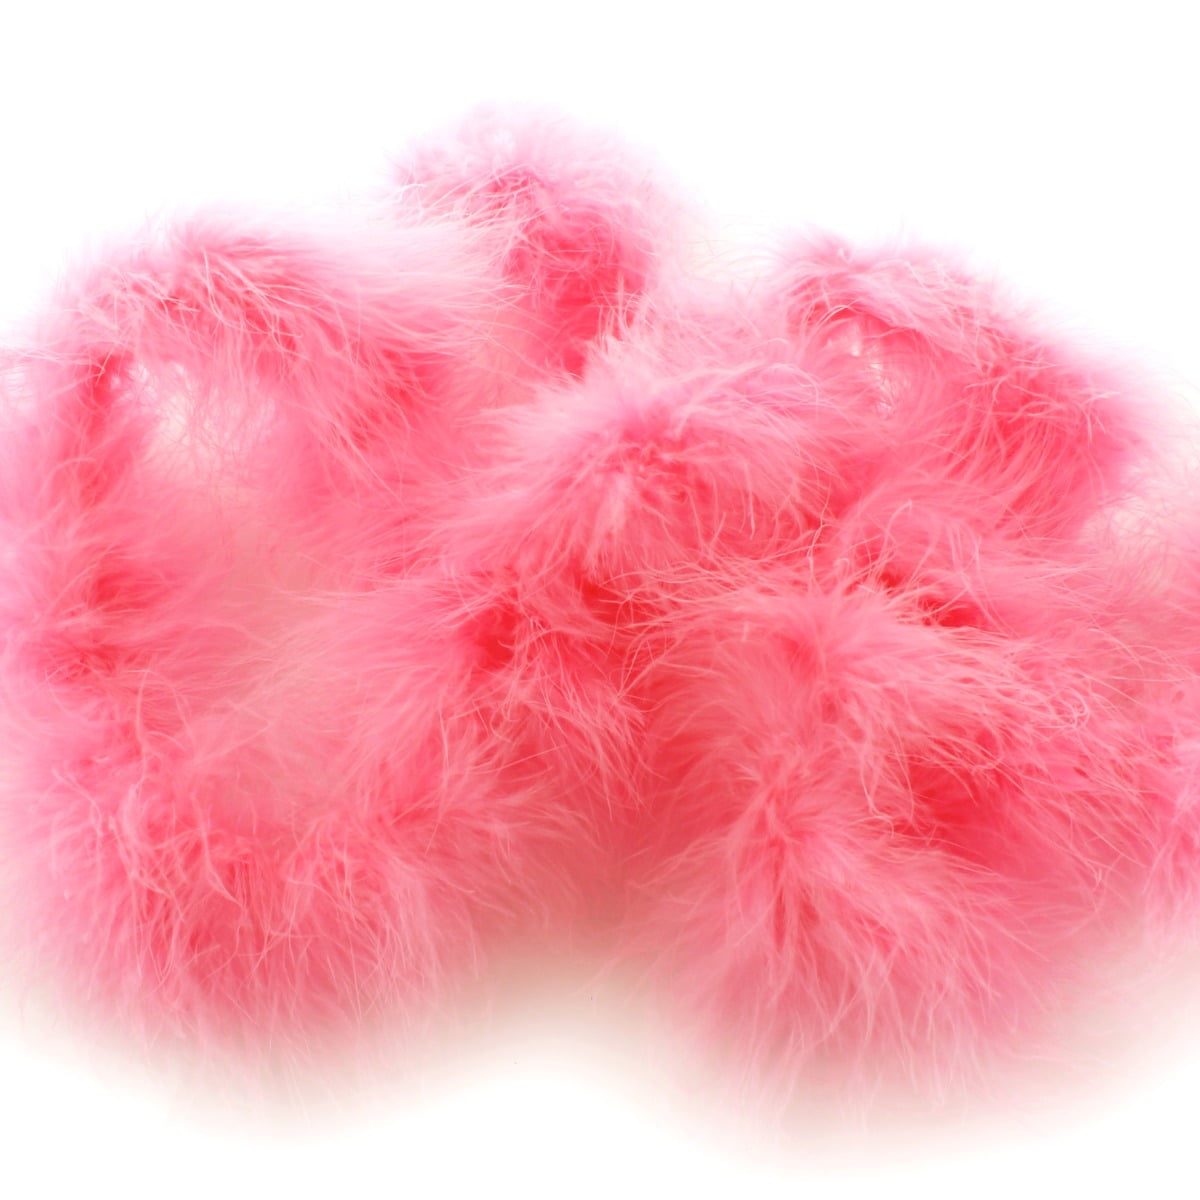 Hairbow Center Hot Pink All Occasion Full Marabou Feather Boa, 72 inch, Adult Unisex, Size: One Size